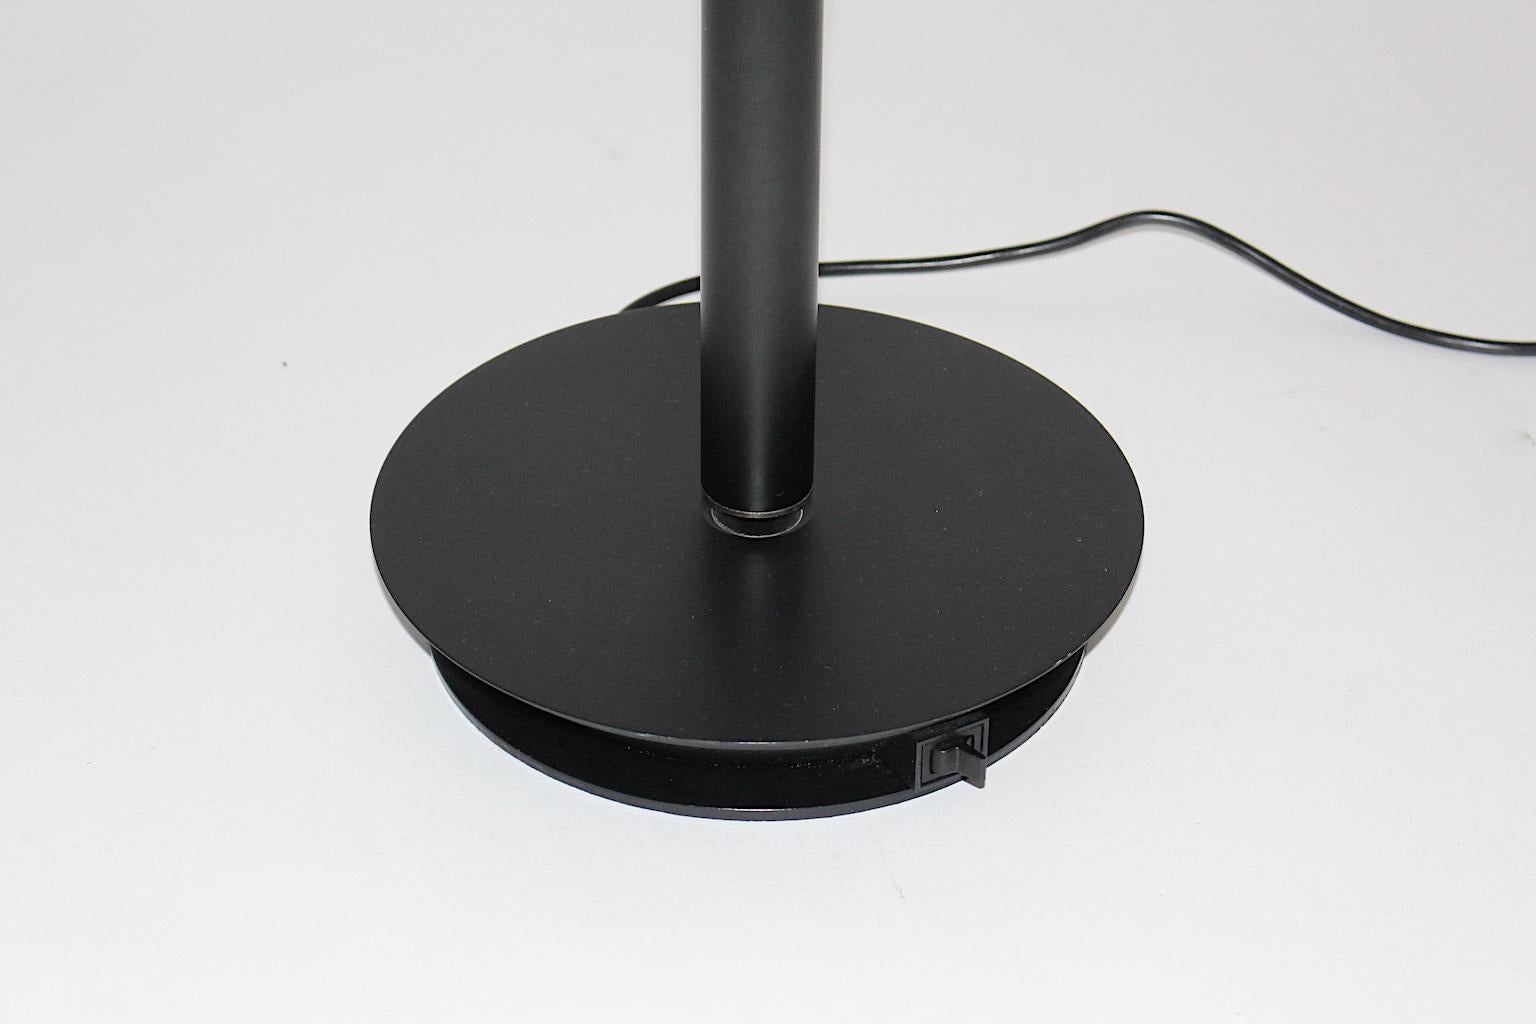 Postmodern Vintage Black Floor Lamp by Carlo Forcolini 1989 for Artemide Italy For Sale 2